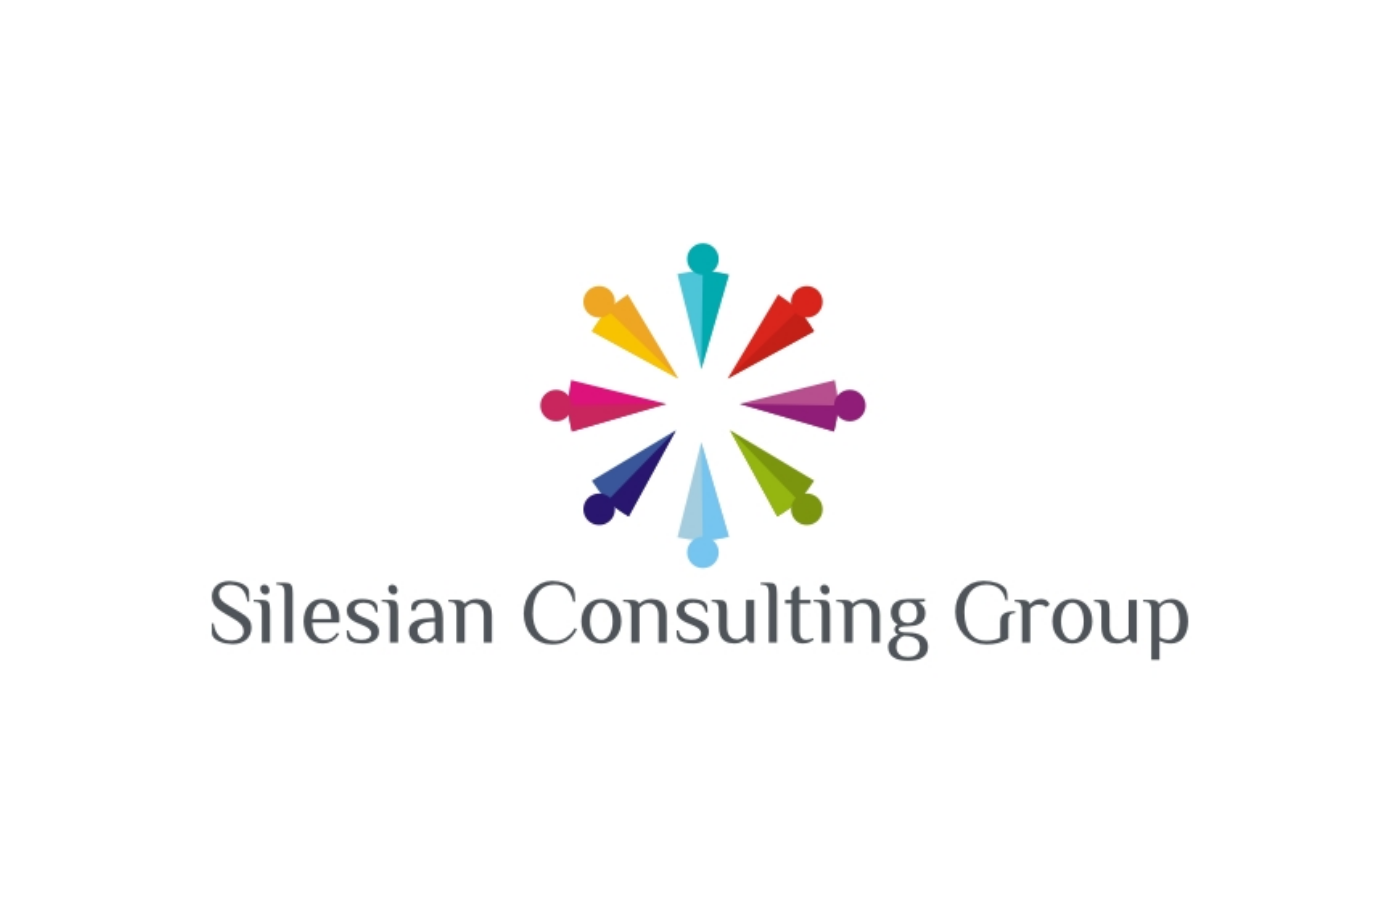 Silesian Consulting Group